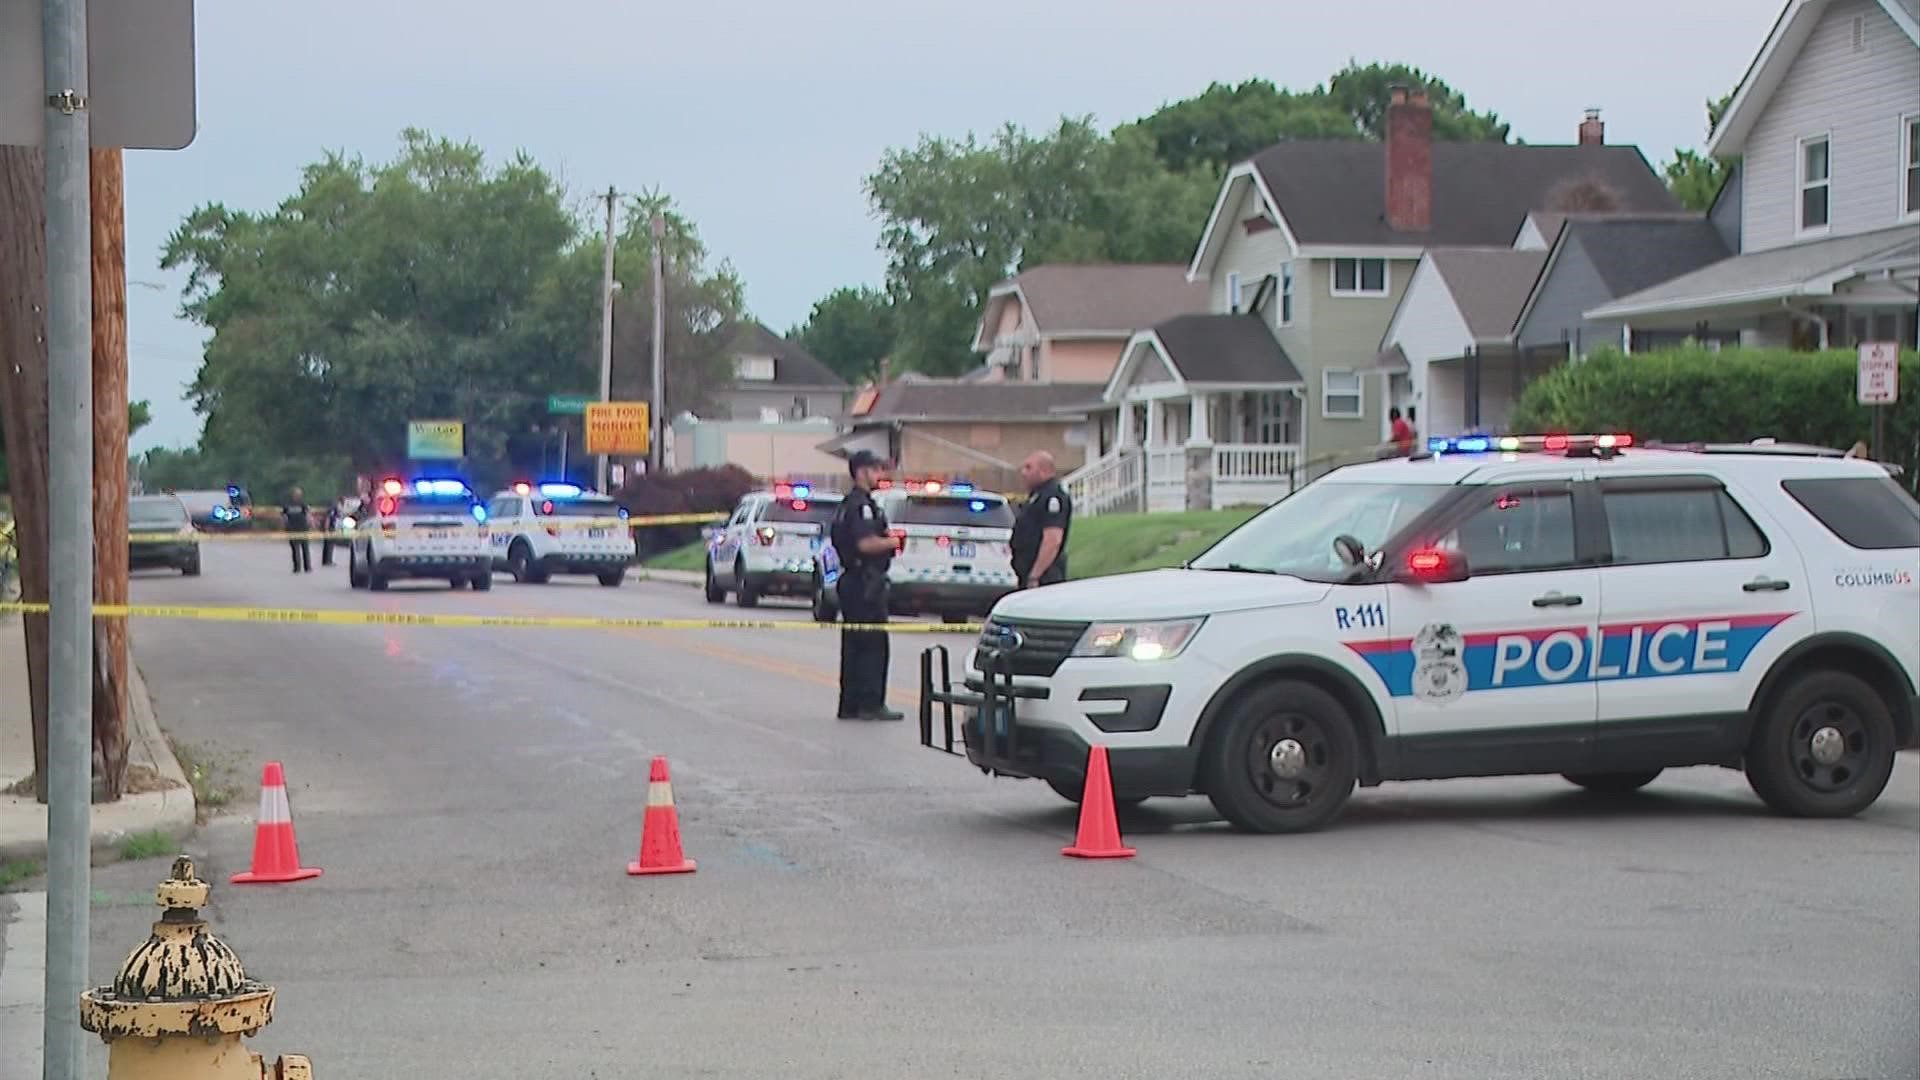 Columbus police said the shooting happened around 7:40 p.m. at the intersection of Lockbourne Road and Thurman Avenue.